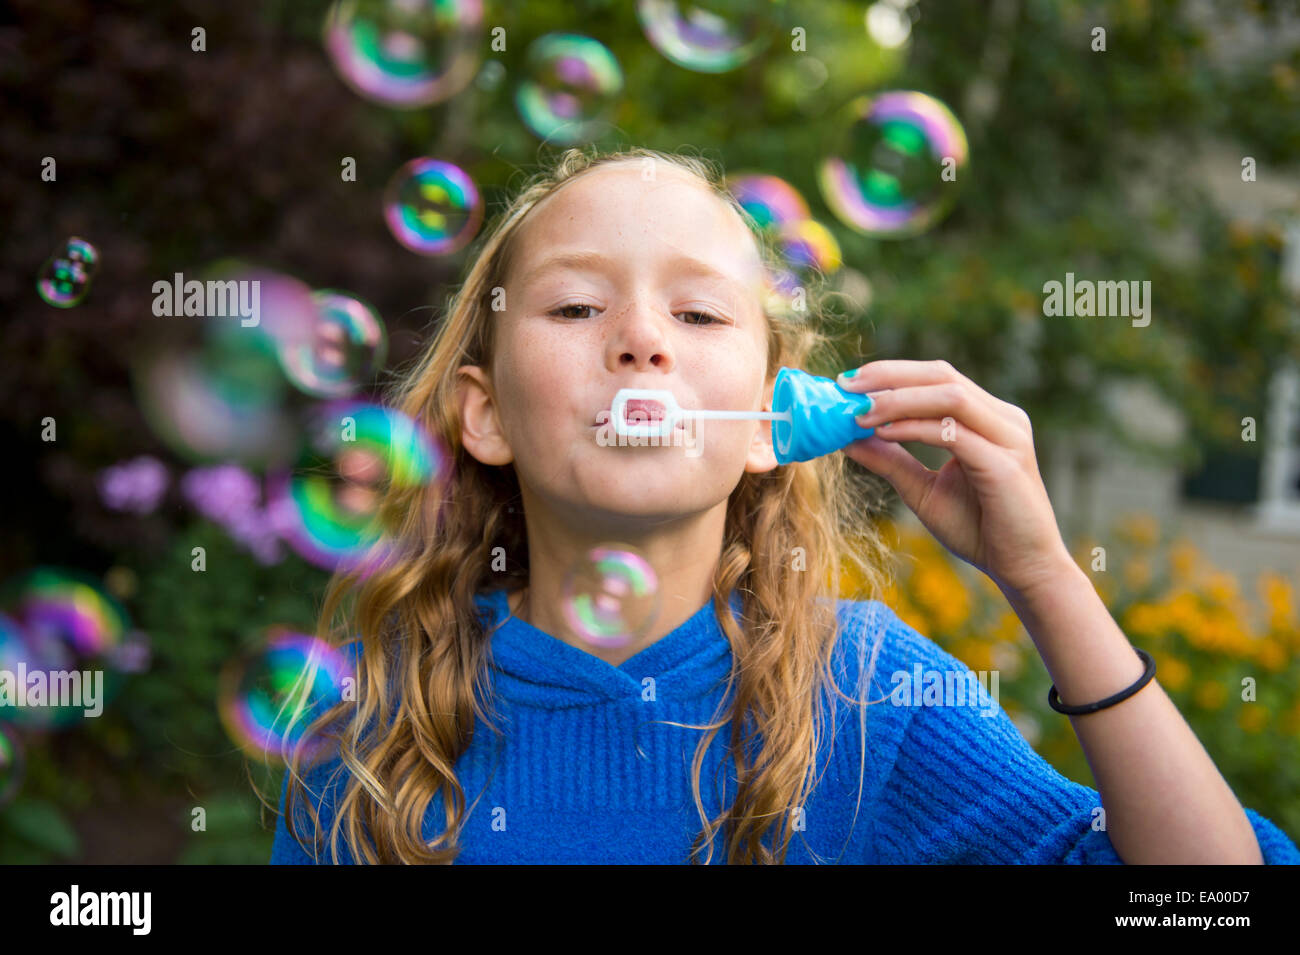 Girl blowing bubbles in garden Stock Photo